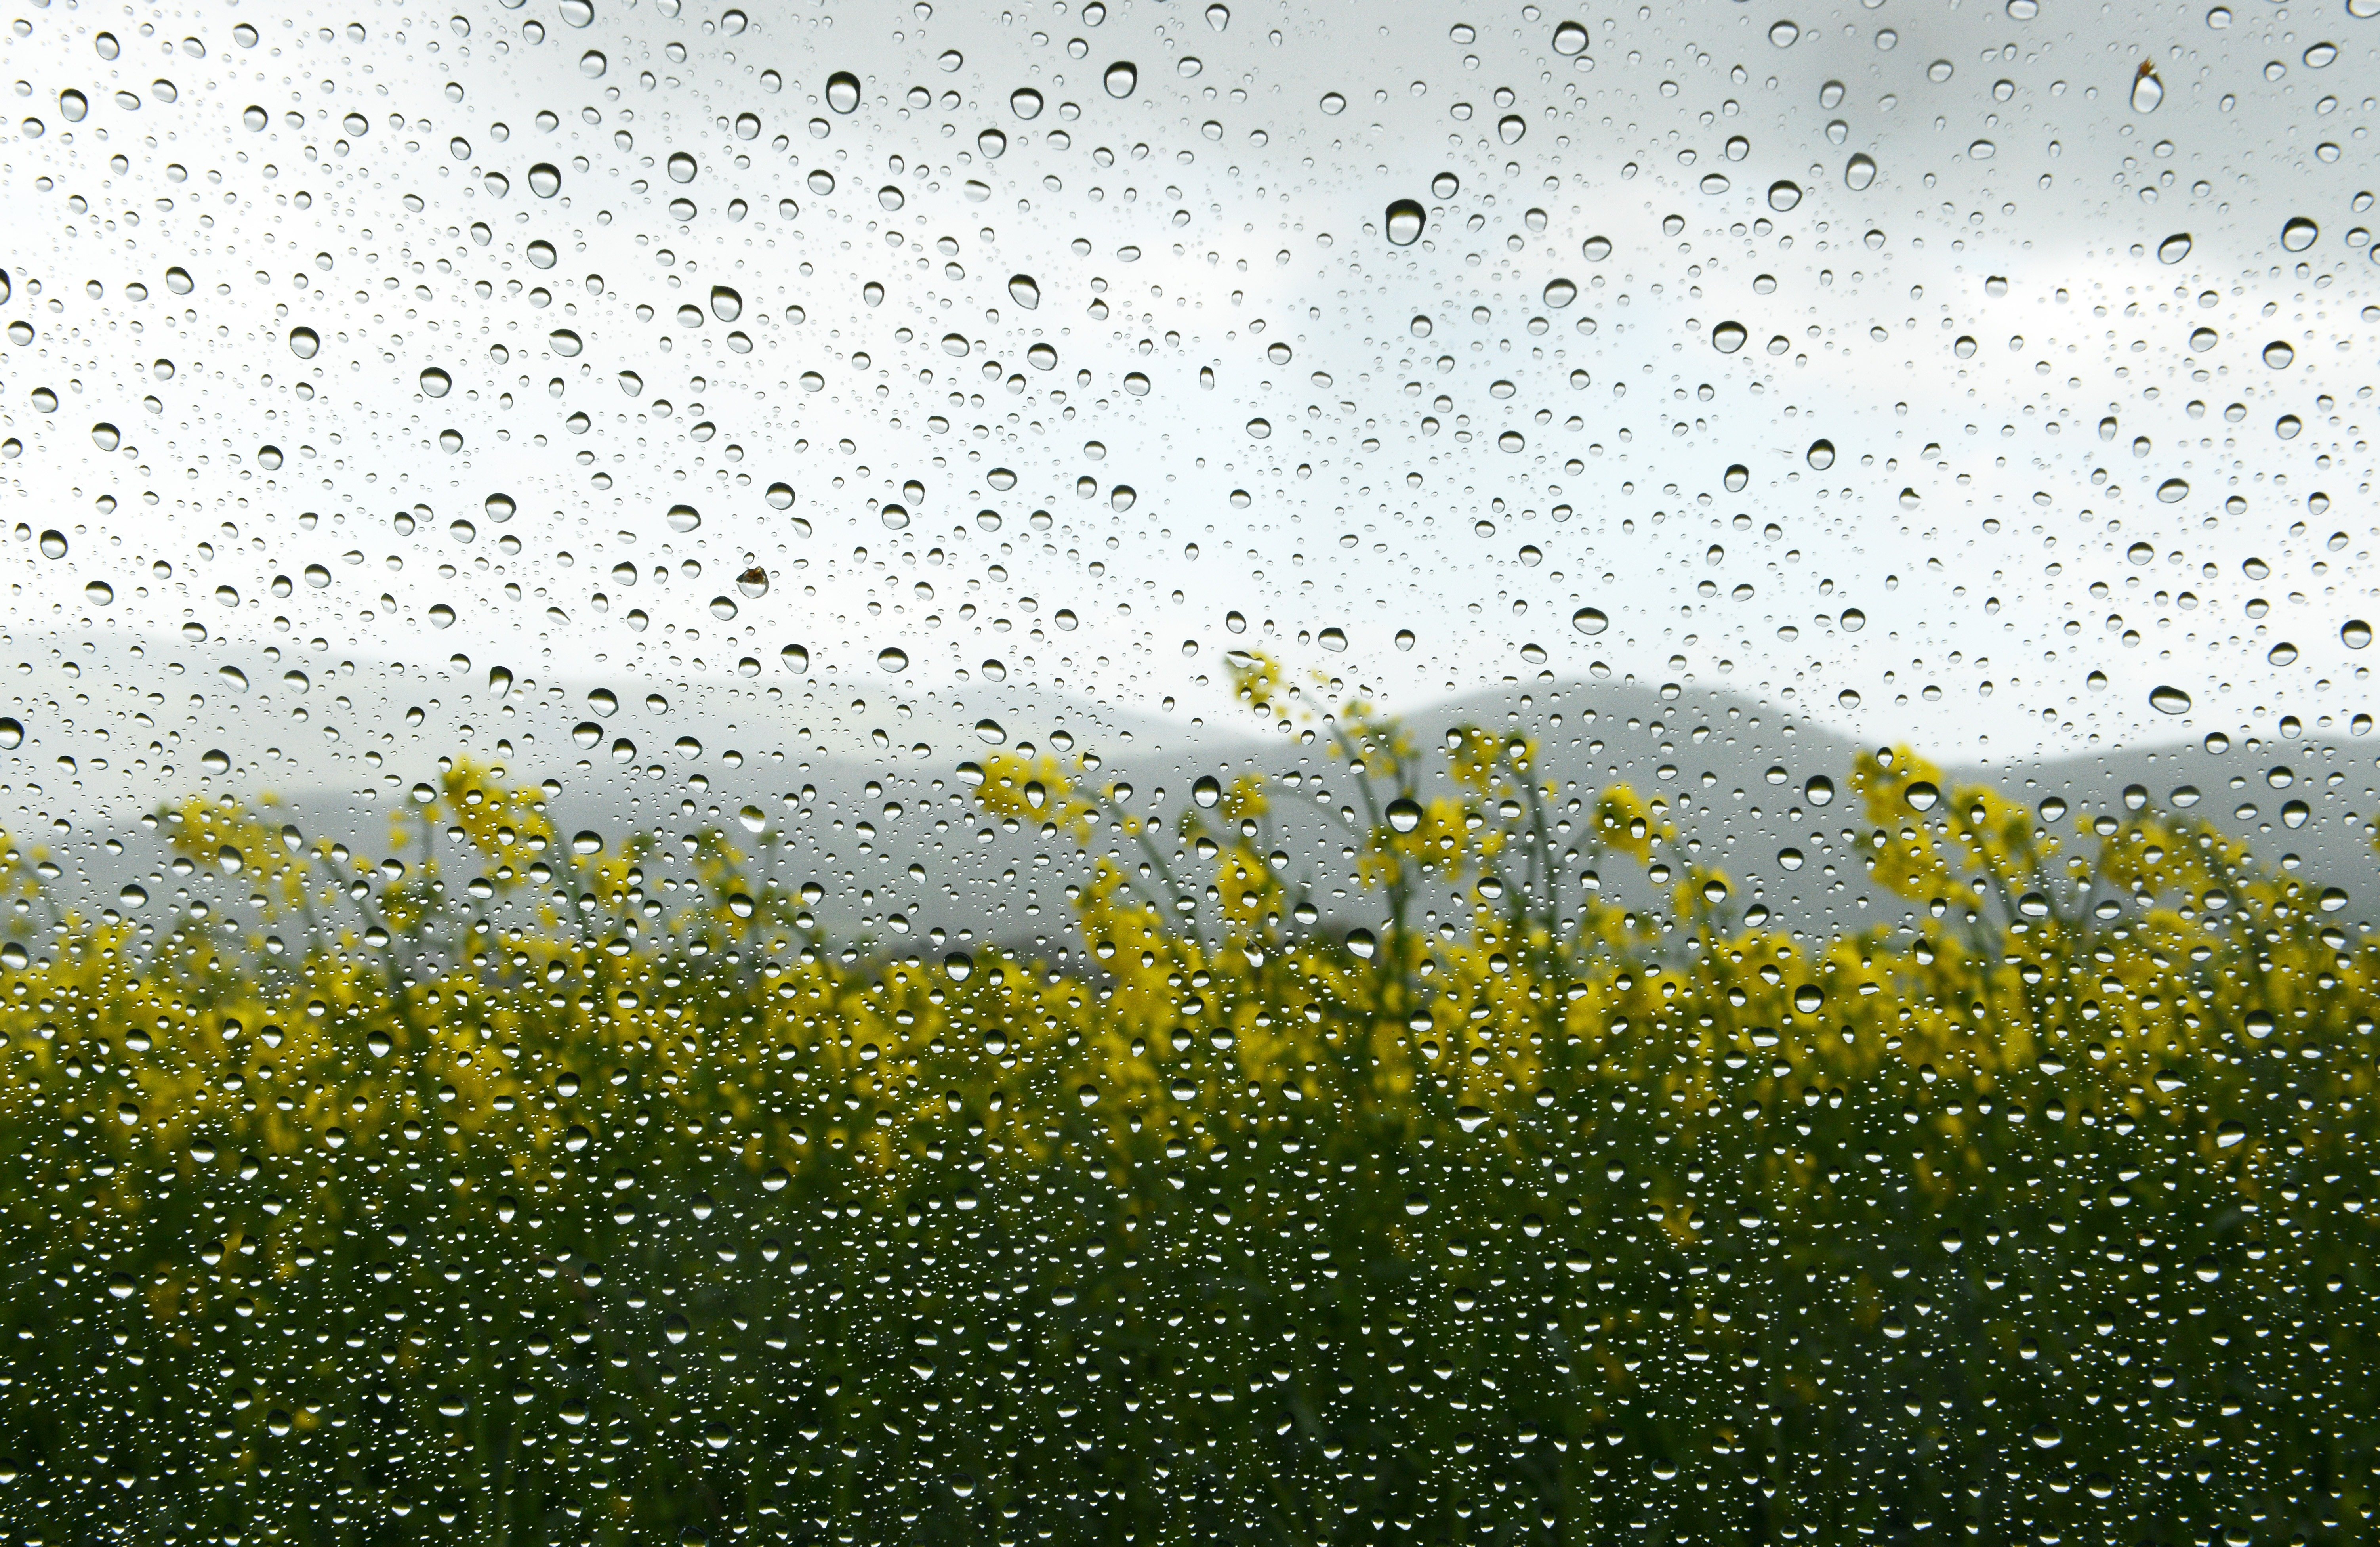 Apr. 14, 2014. Rain drops cover the window of the front passenger seat of a car near Lieschenruh, Germany.